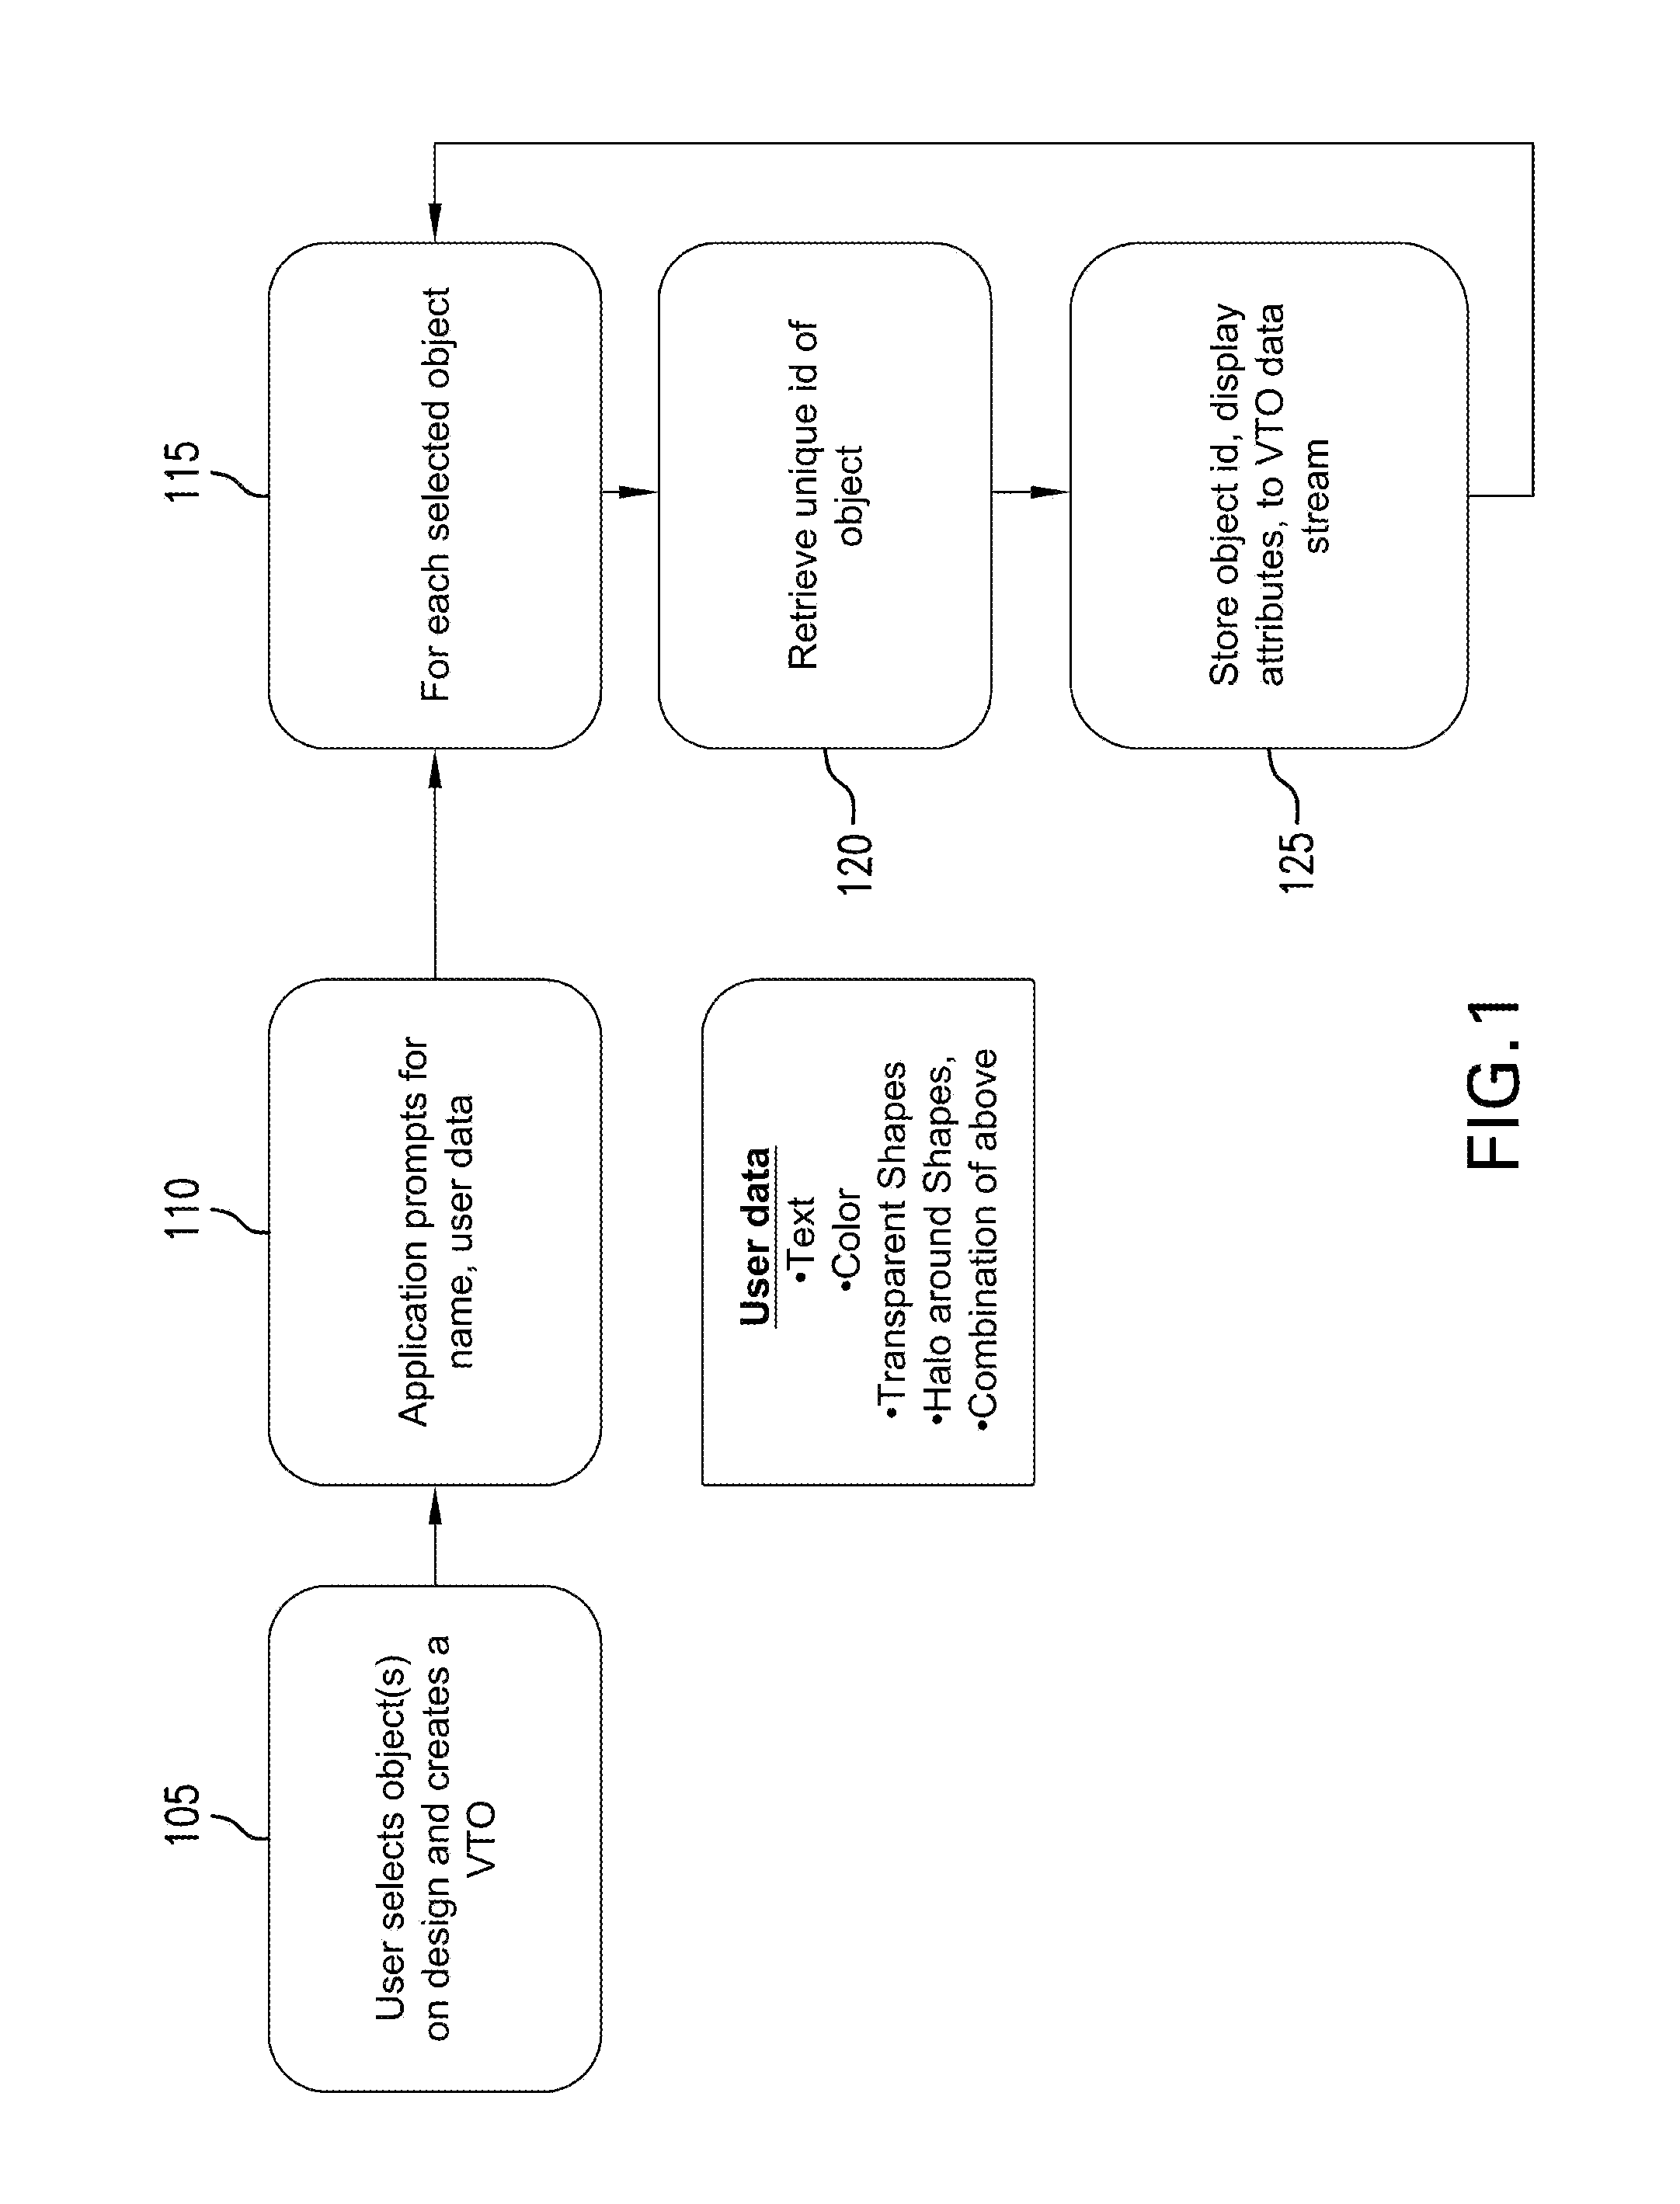 System and method for providing an inter-application overlay to communicate information between users and tools in the EDA design flow